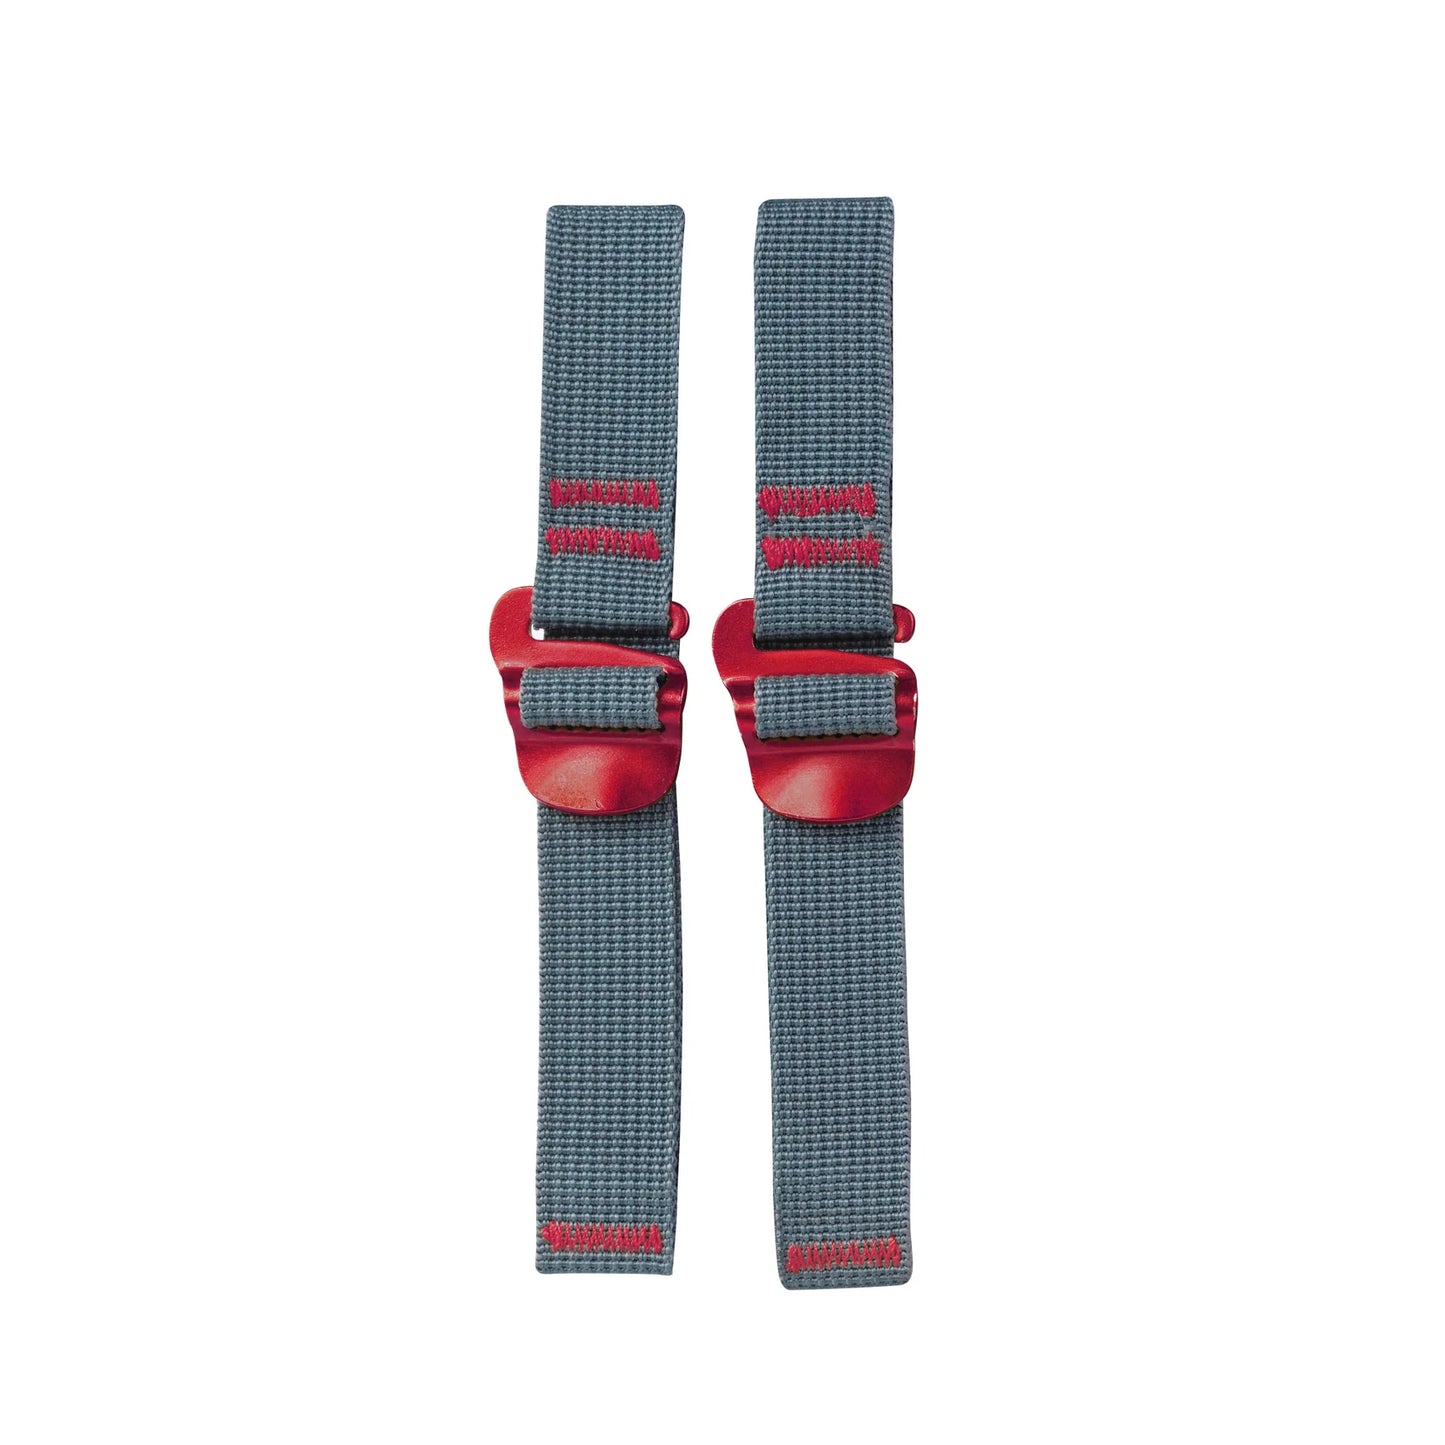 SEA TO SUMMIT HOOK RELEASE ACCESSORY STRAPS